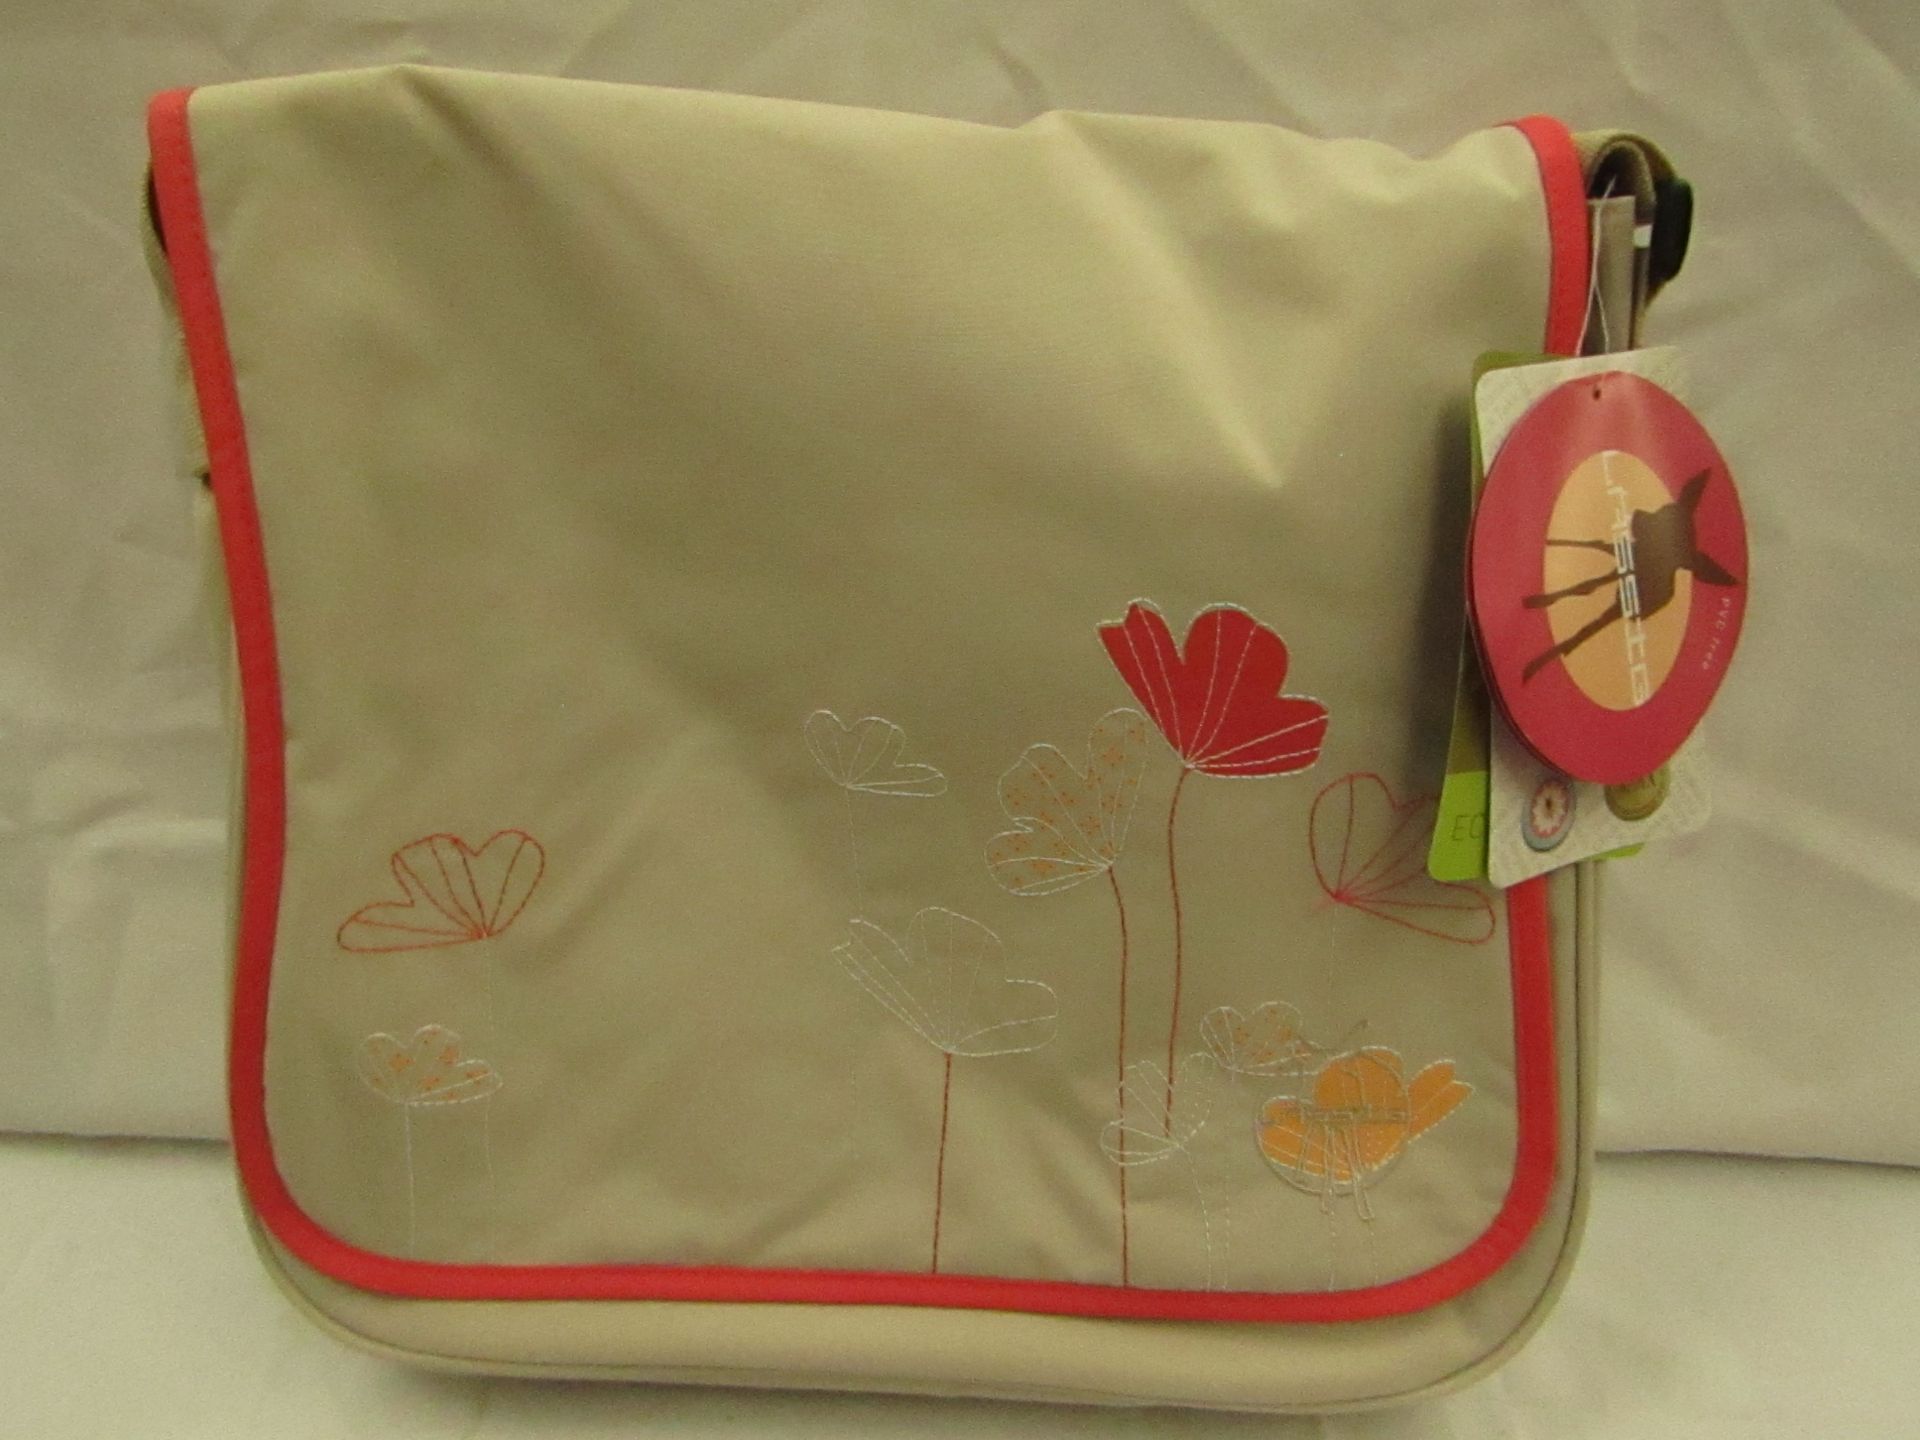 Lassig - Womens Basic Messenger Bag - New With Original Tags & Packaged.